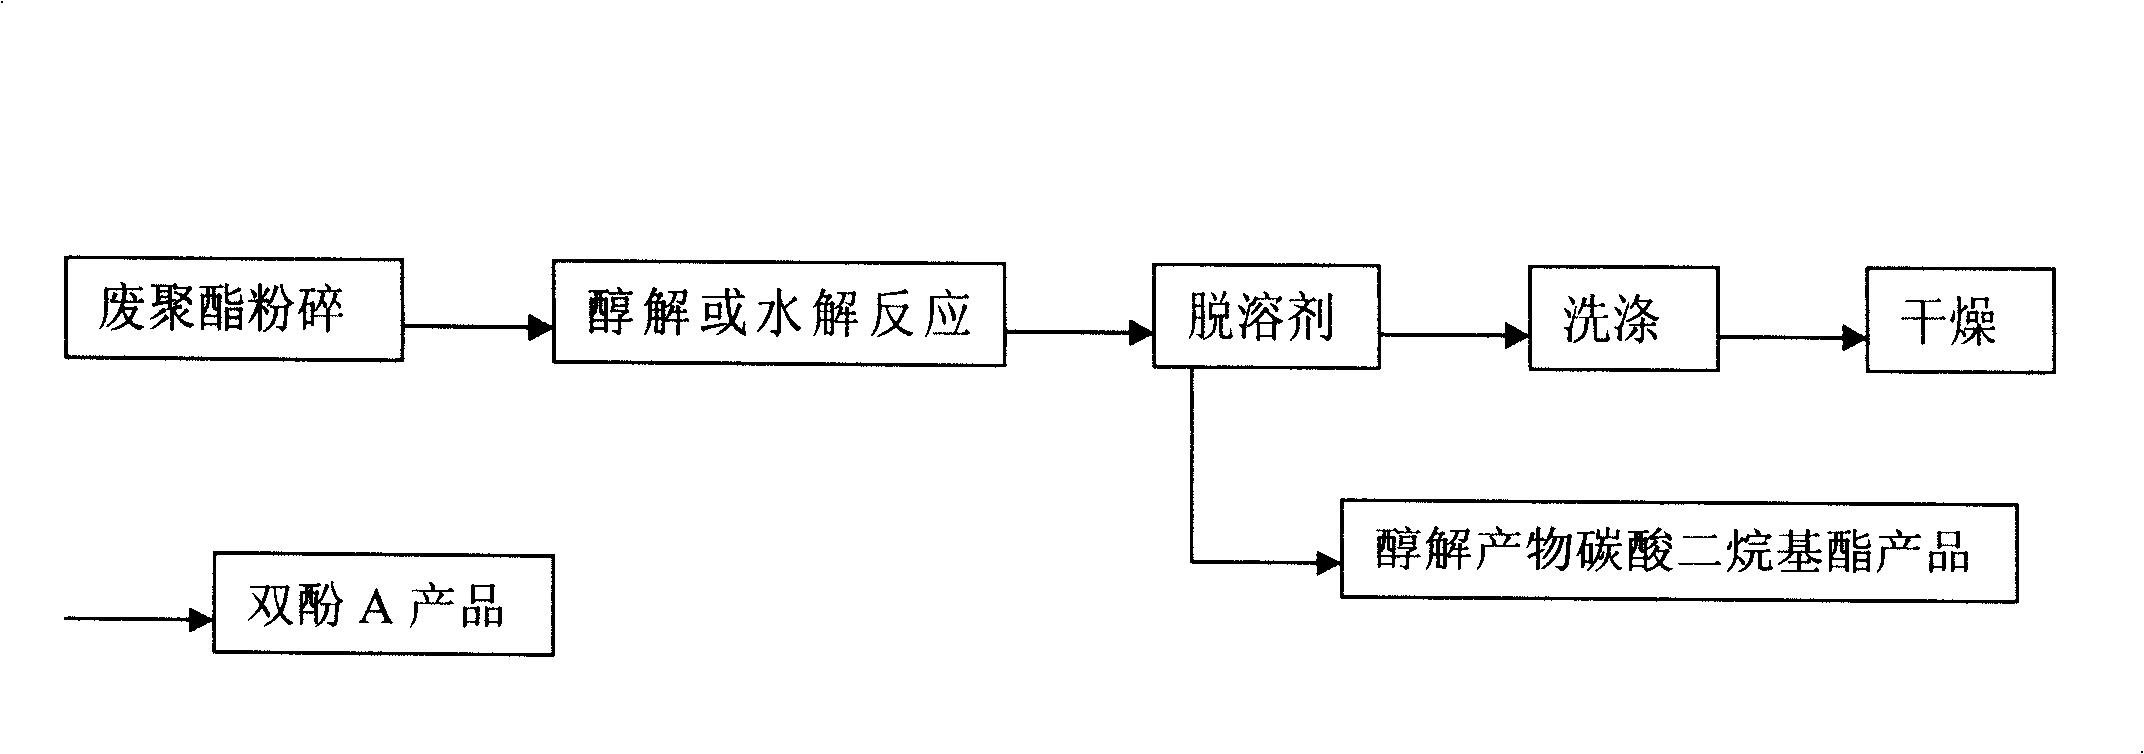 Chemical recovery method for waste polycarbonate material